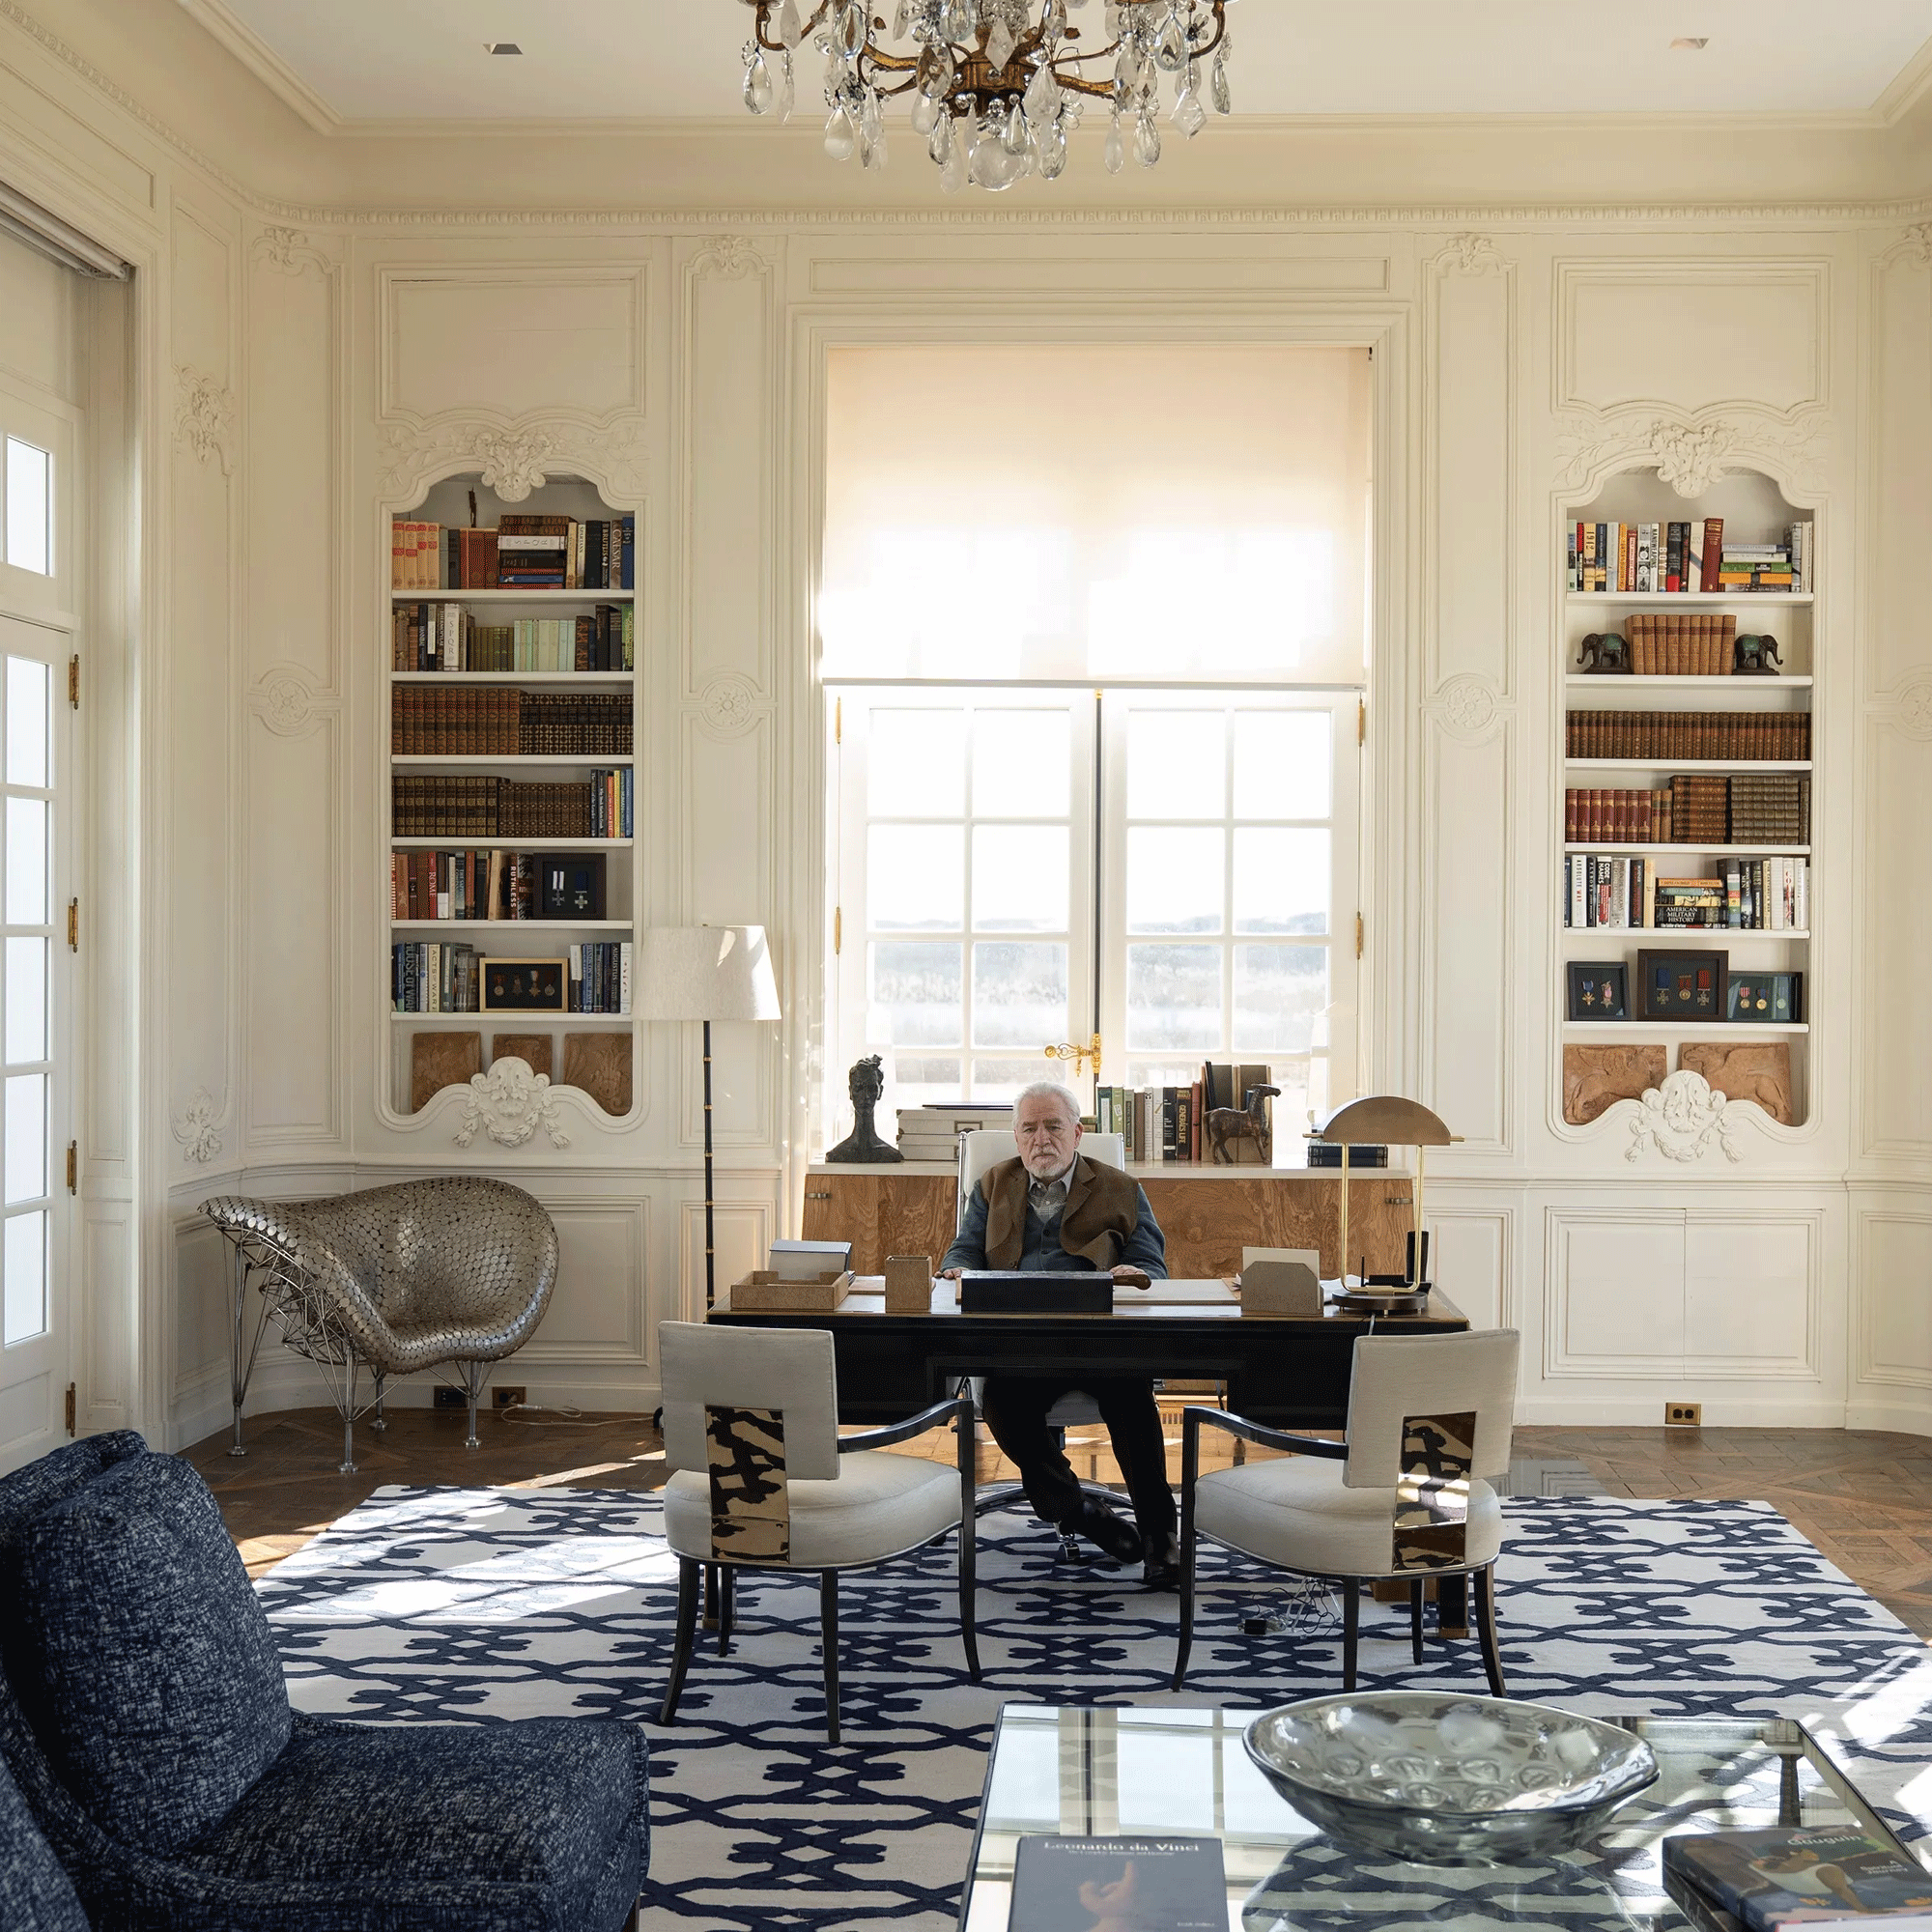 HBO's Succession is the source of this breakout interior trend - we're already obsessed